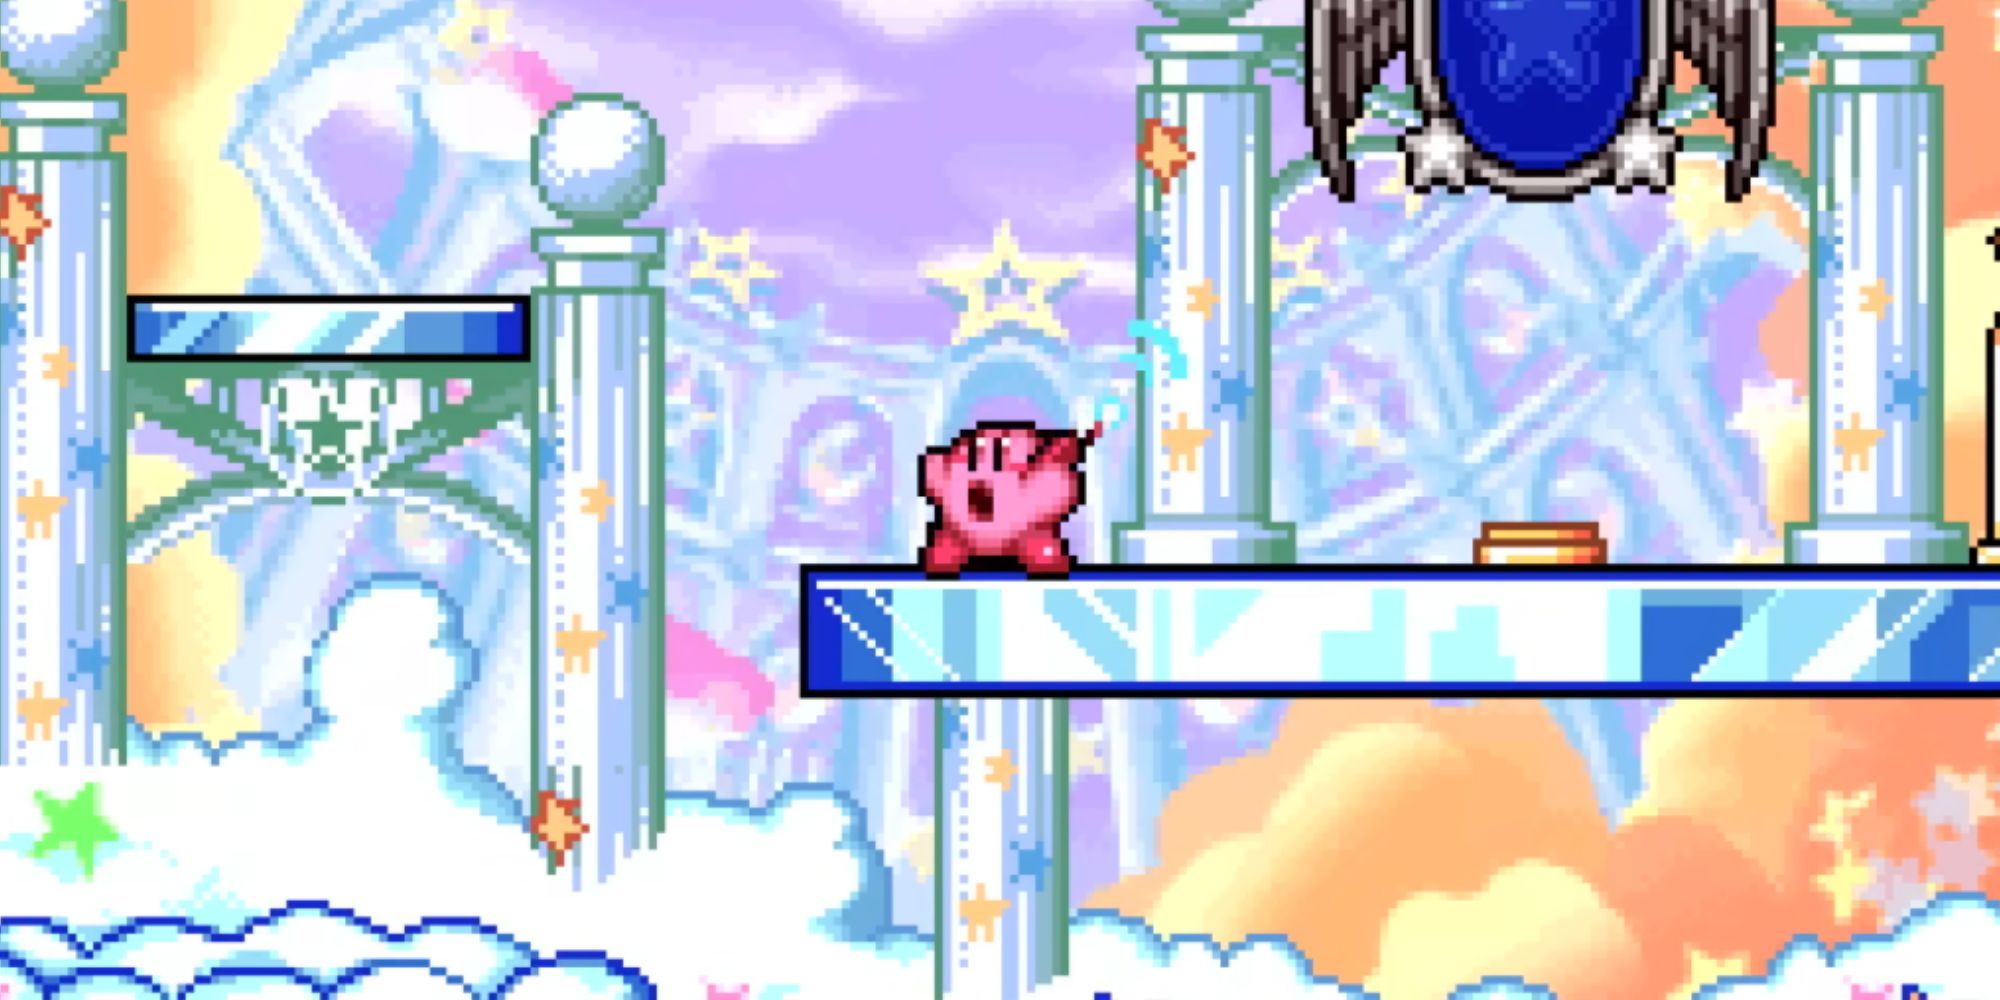 Kirby uses his Cellphone on a level in the clouds